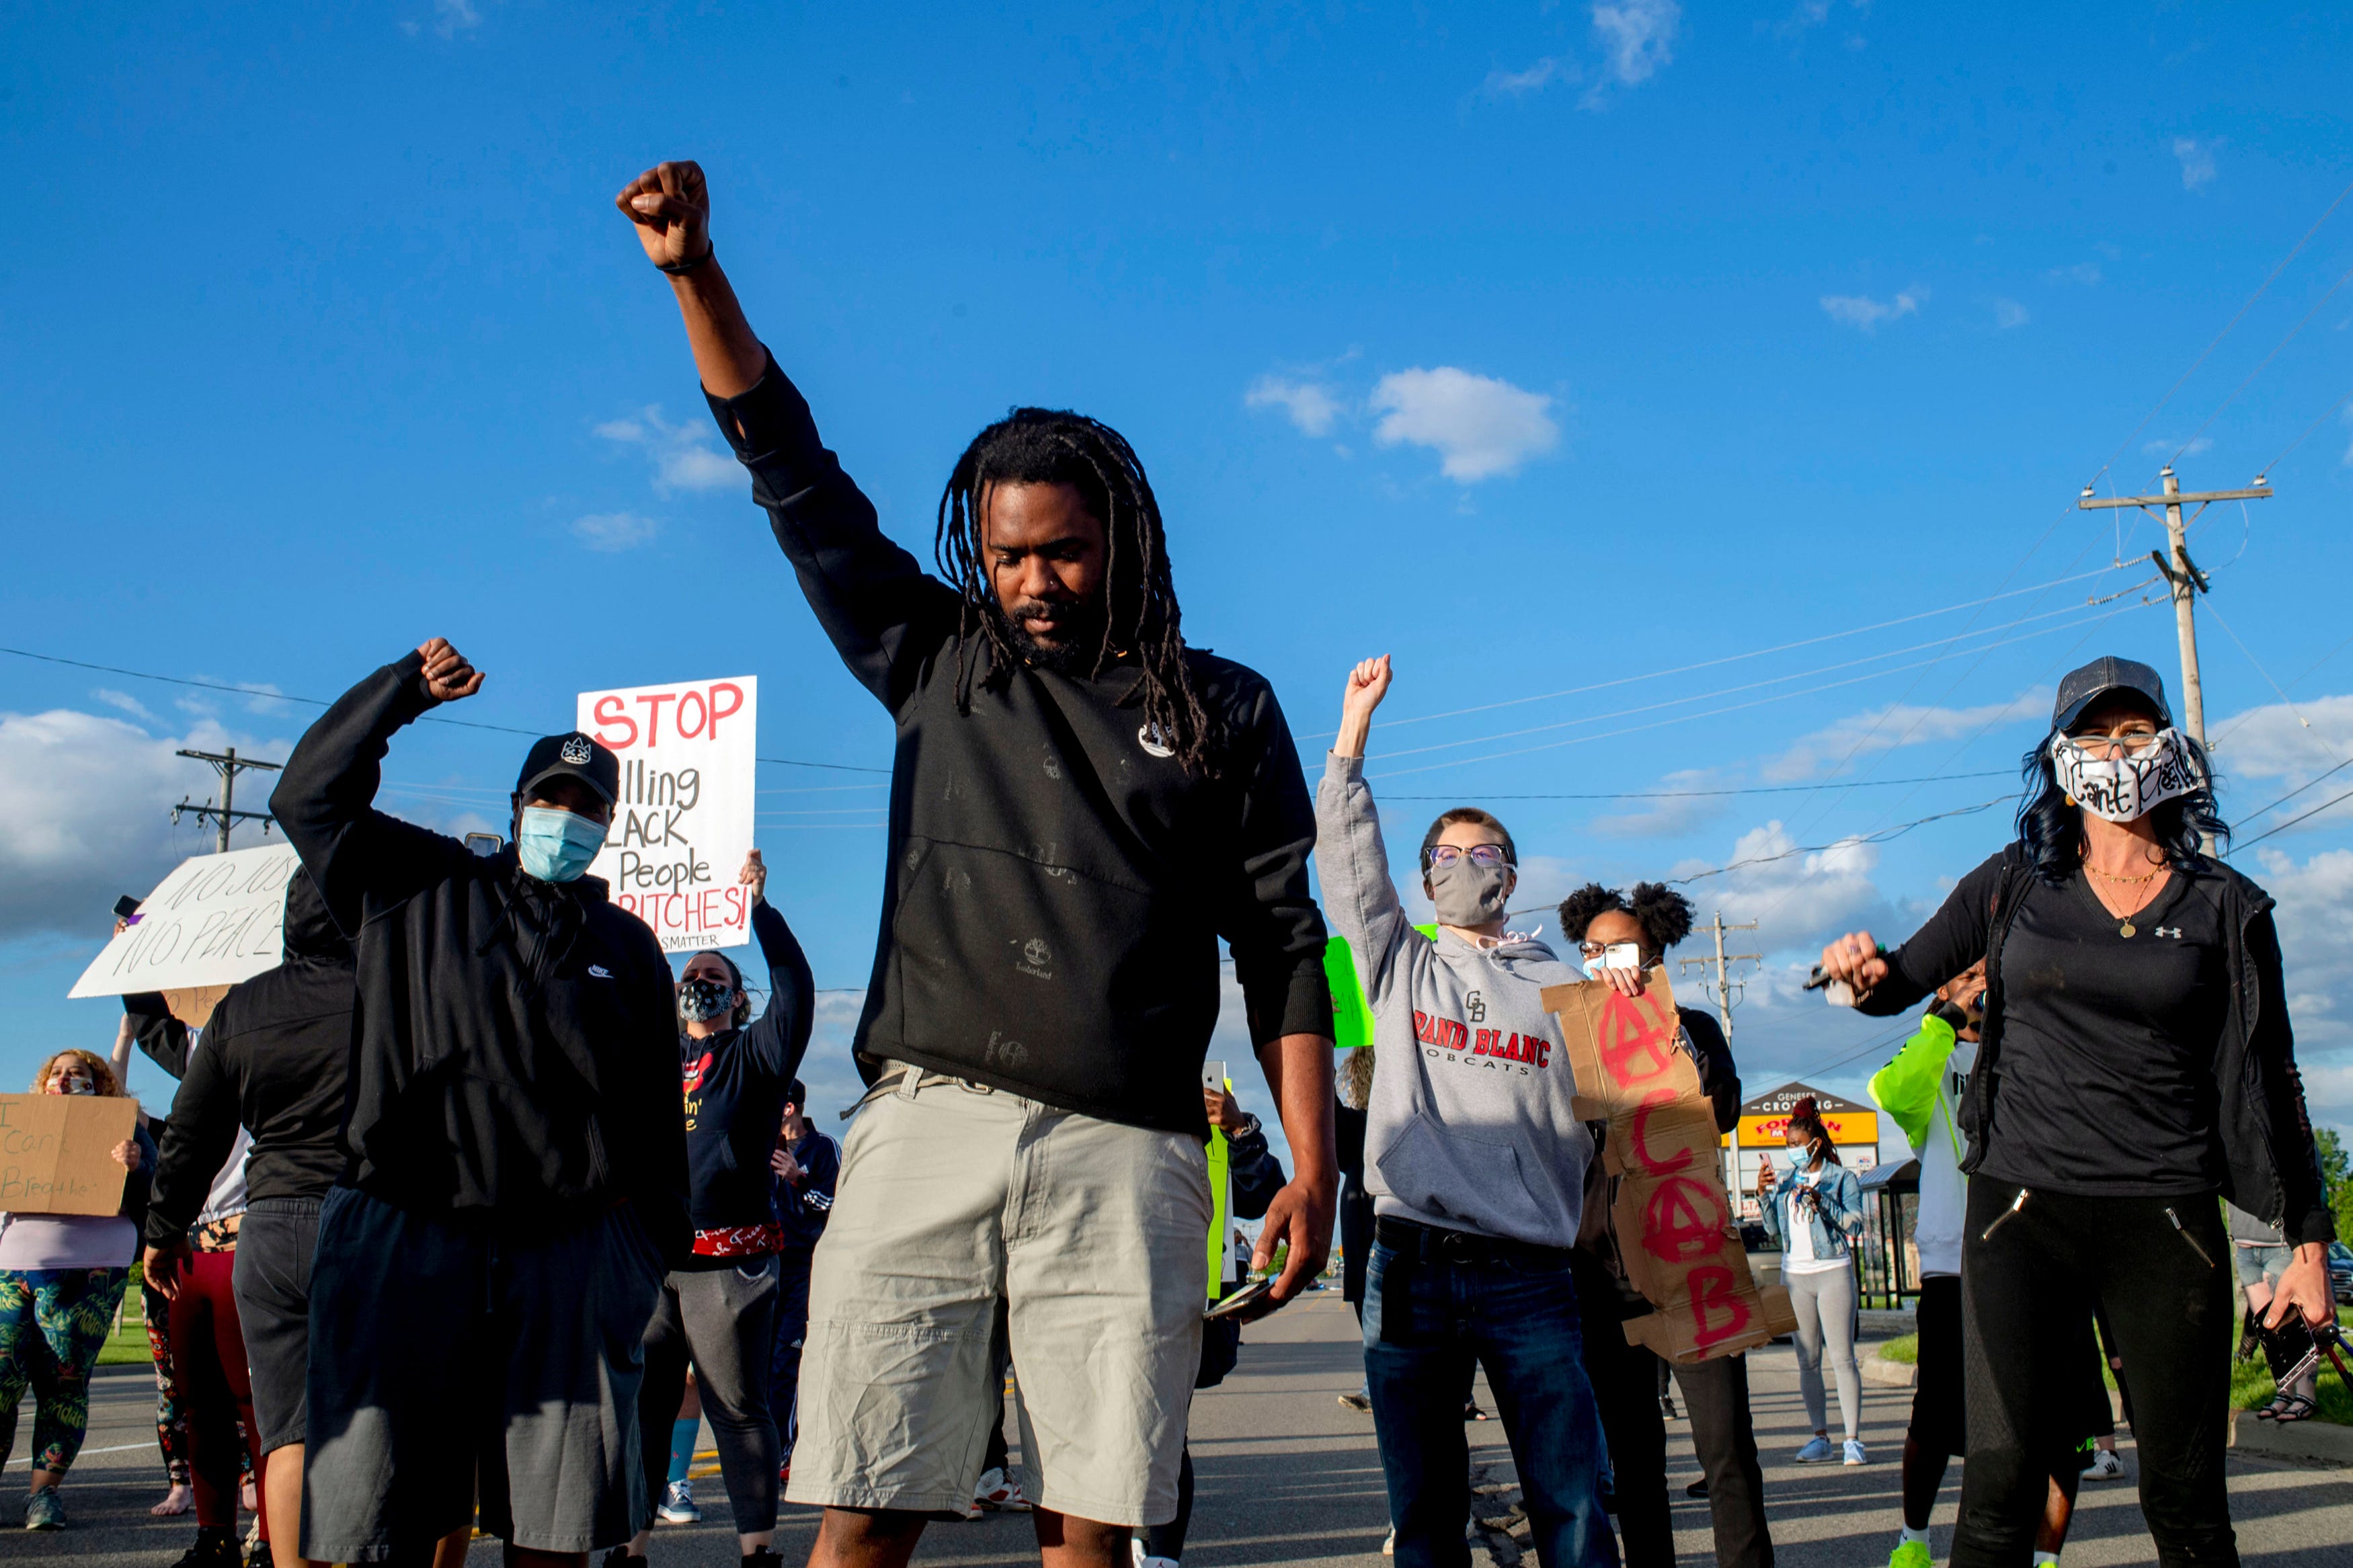 Flint resident Jawann Horton, 32, bows his head as he holds his fist to the sky as hundreds march at a peaceful protest seeking justice for George Floyd on Saturday, May 30, 2020 on Miller Road in Flint Township, M.I.  Floyd died in police custody on Memorial Day in Minneapolis.